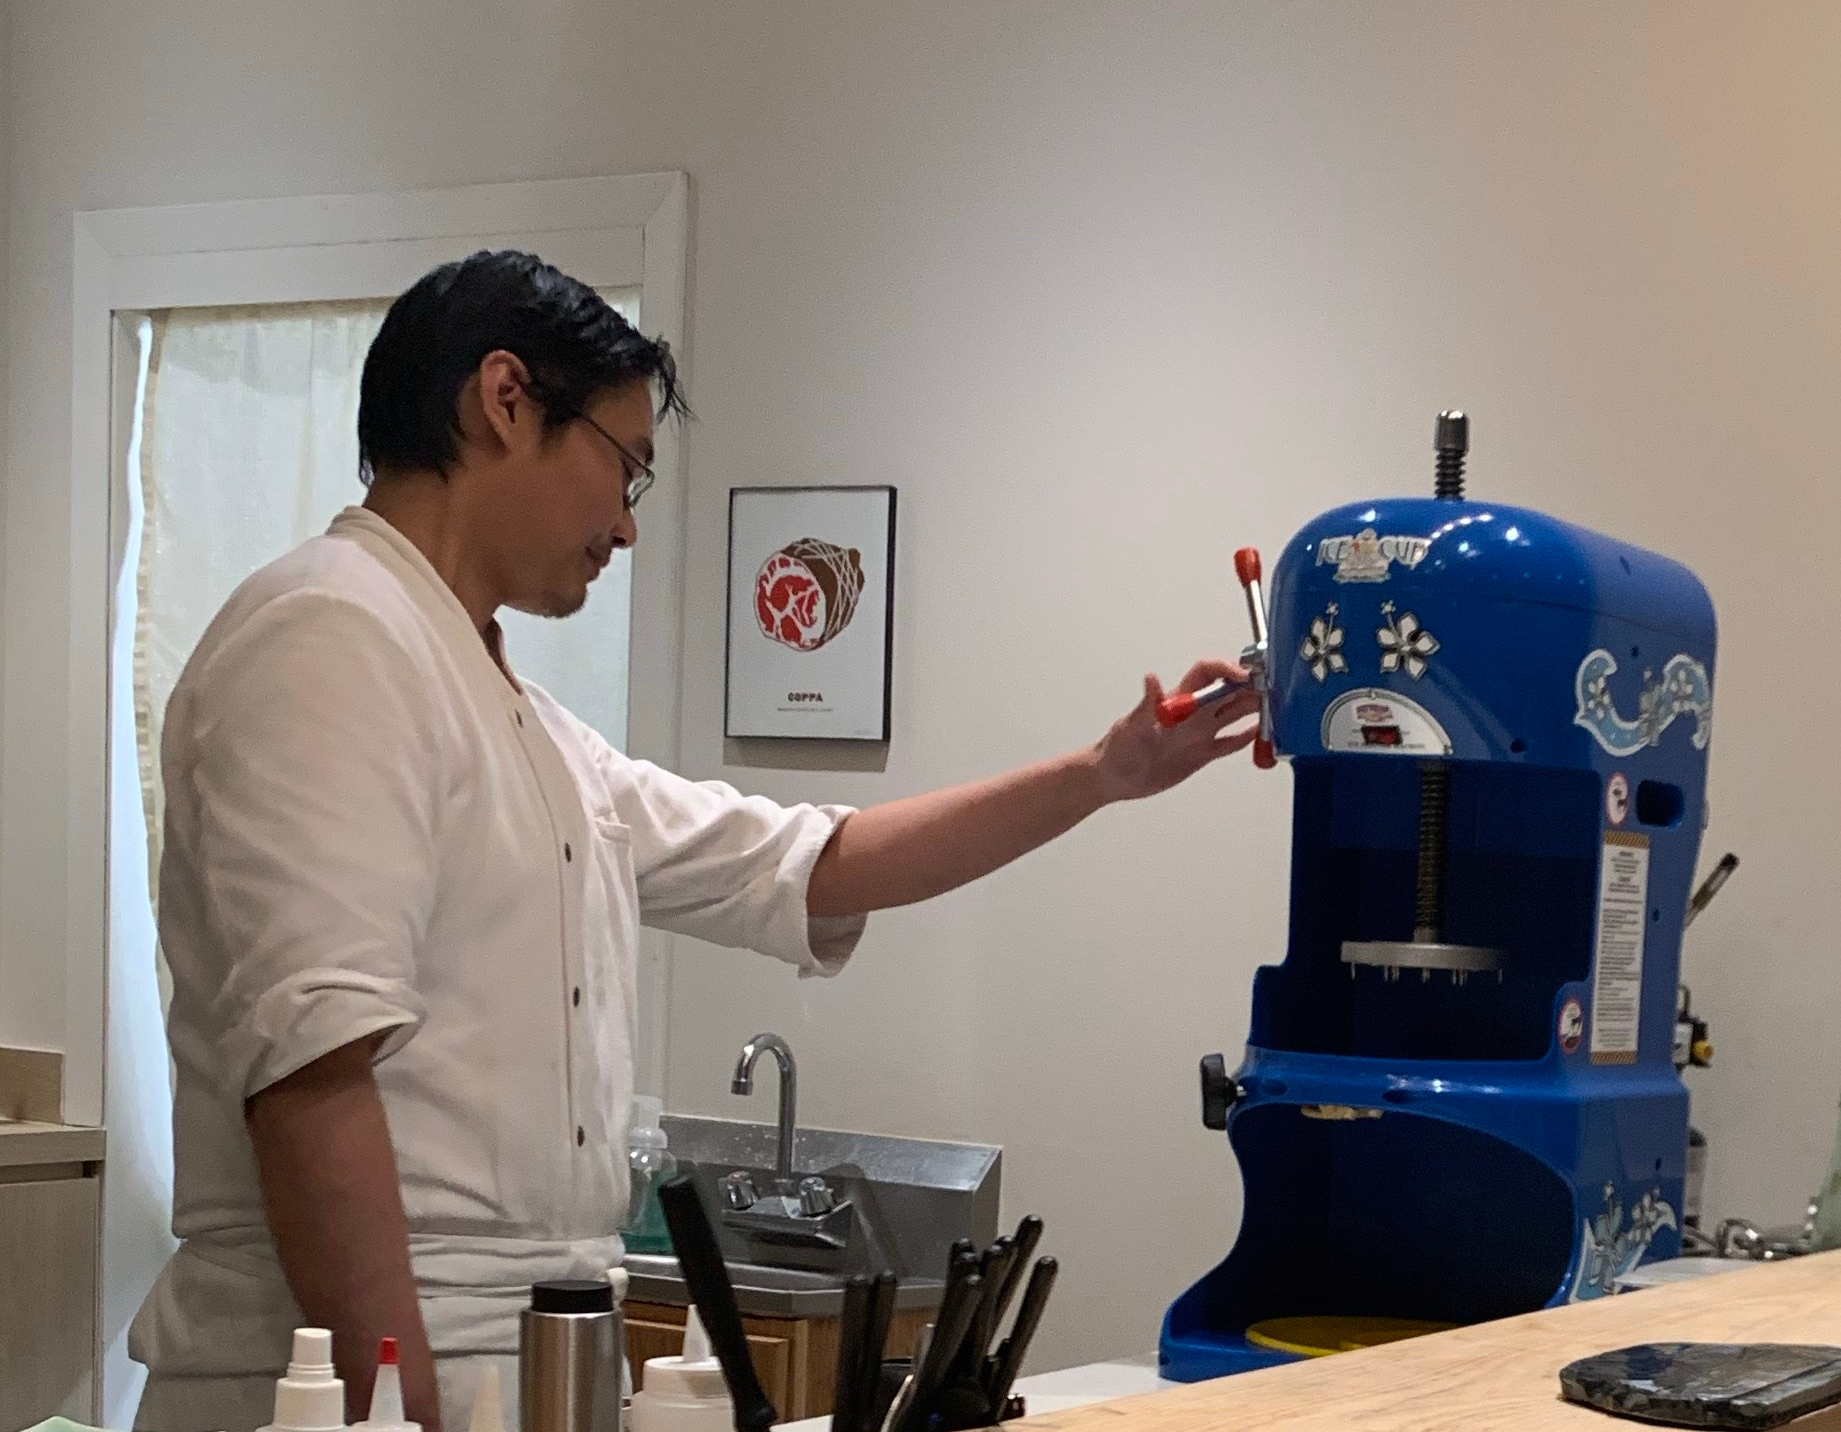 Man wearing glasses and chef attire standing next to a large blue machine. The machine has levers that control a disc. There is nothing inside the machine to be shaved by the disc yet.